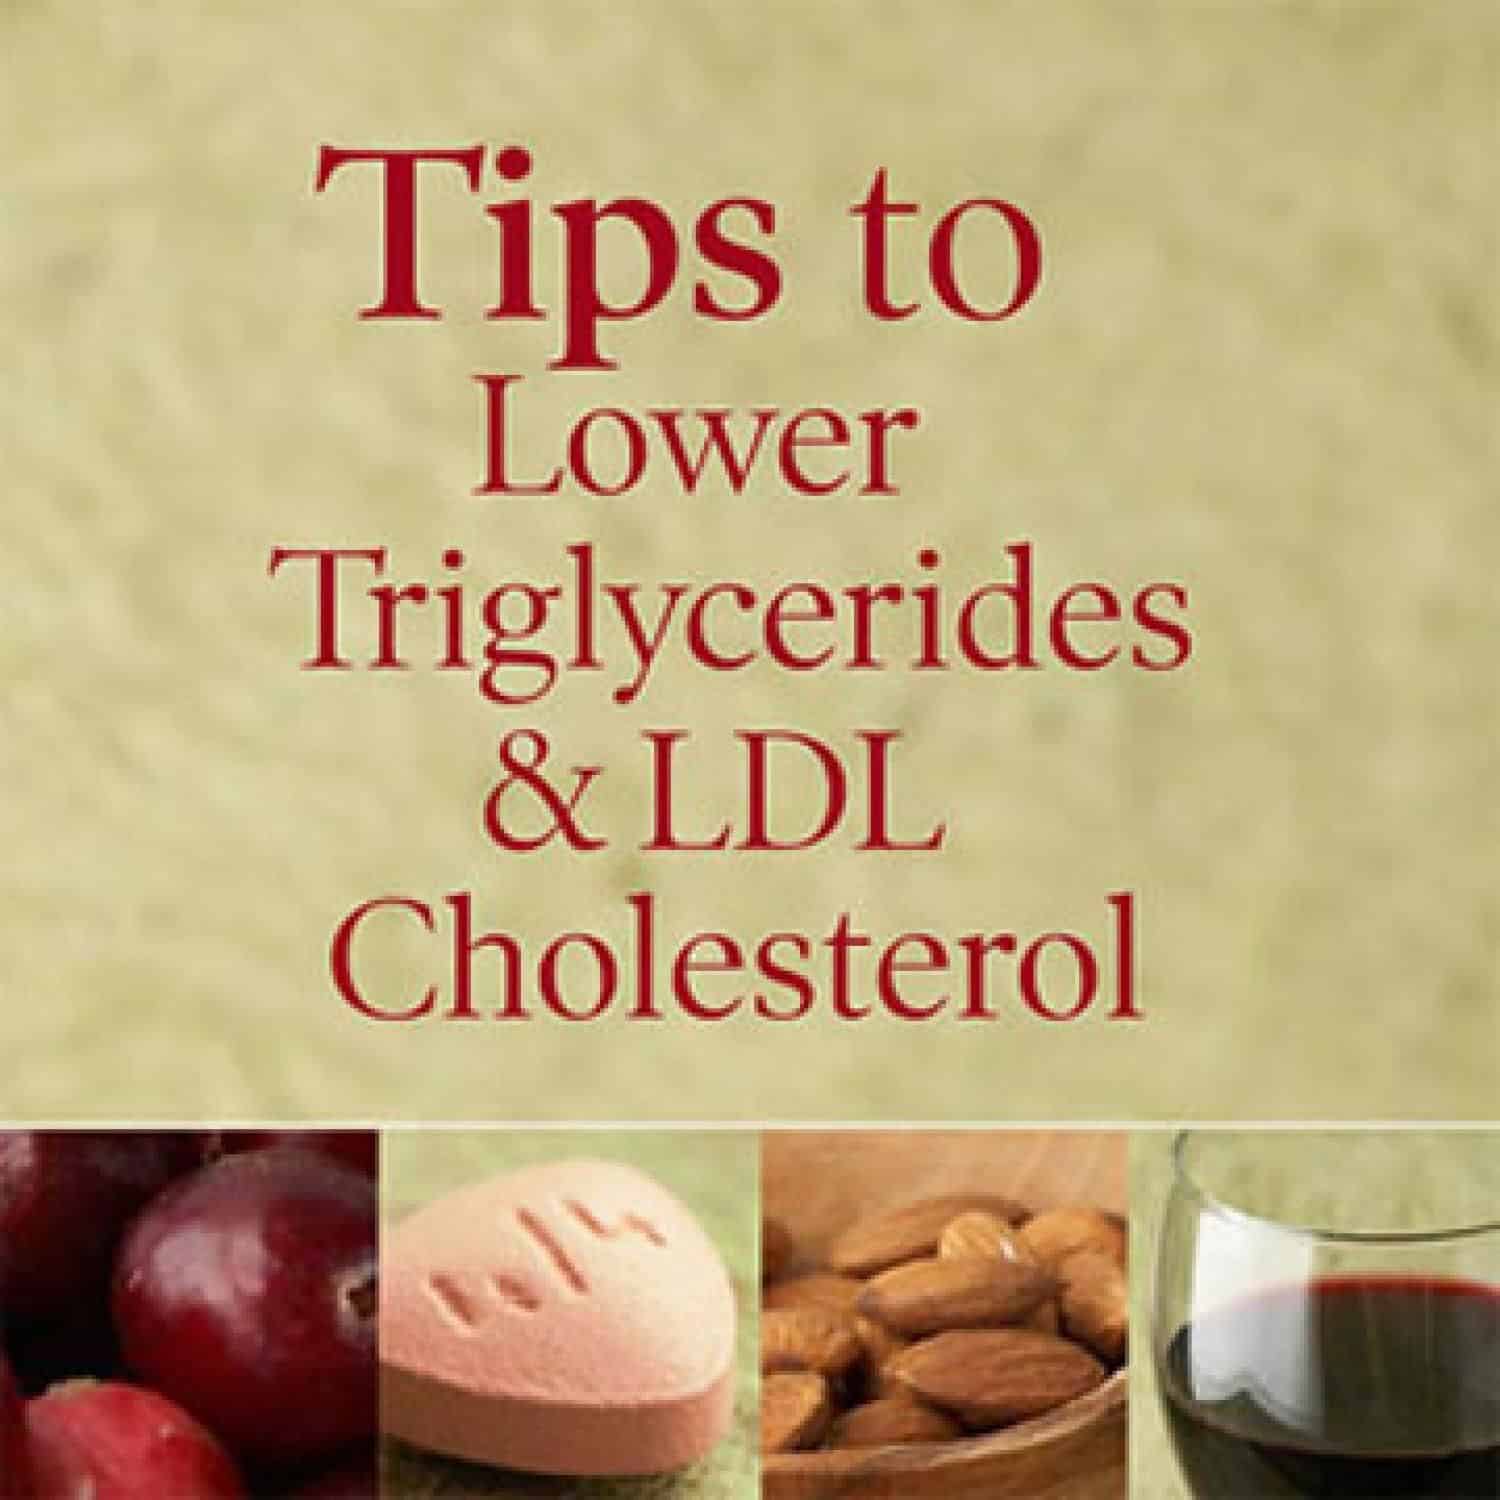 Diet Changes To Lower Triglycerides